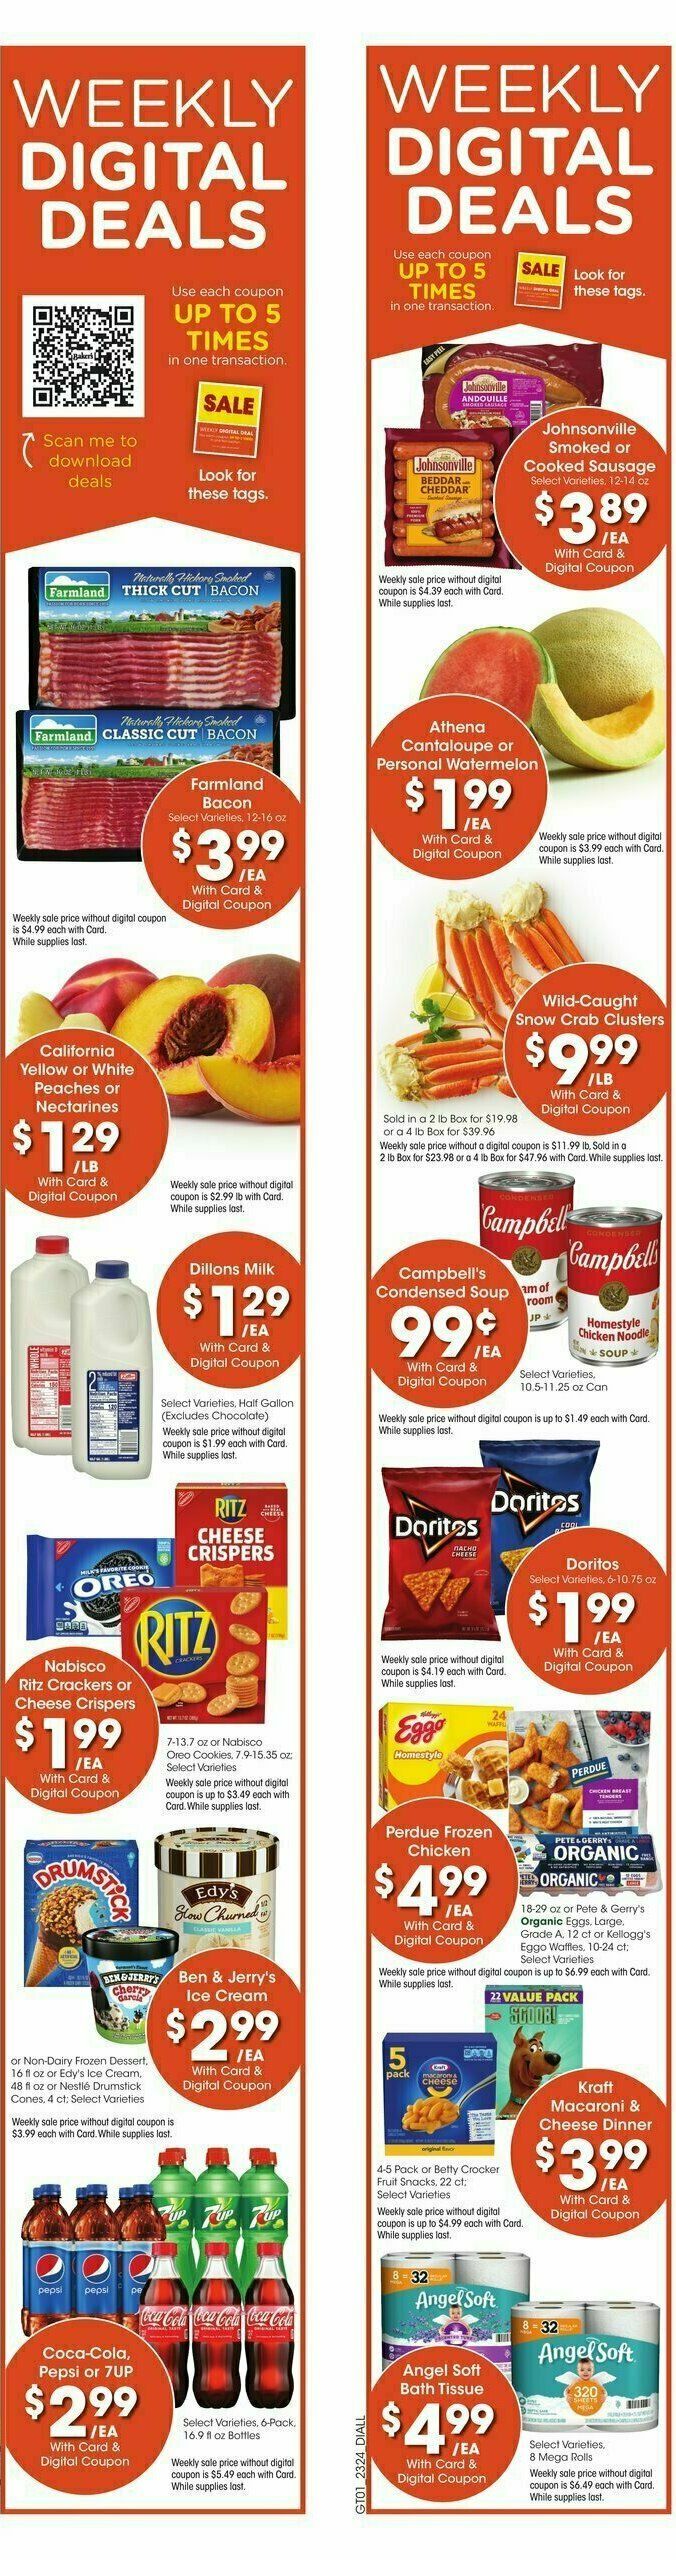 Baker's Weekly Ad from July 12